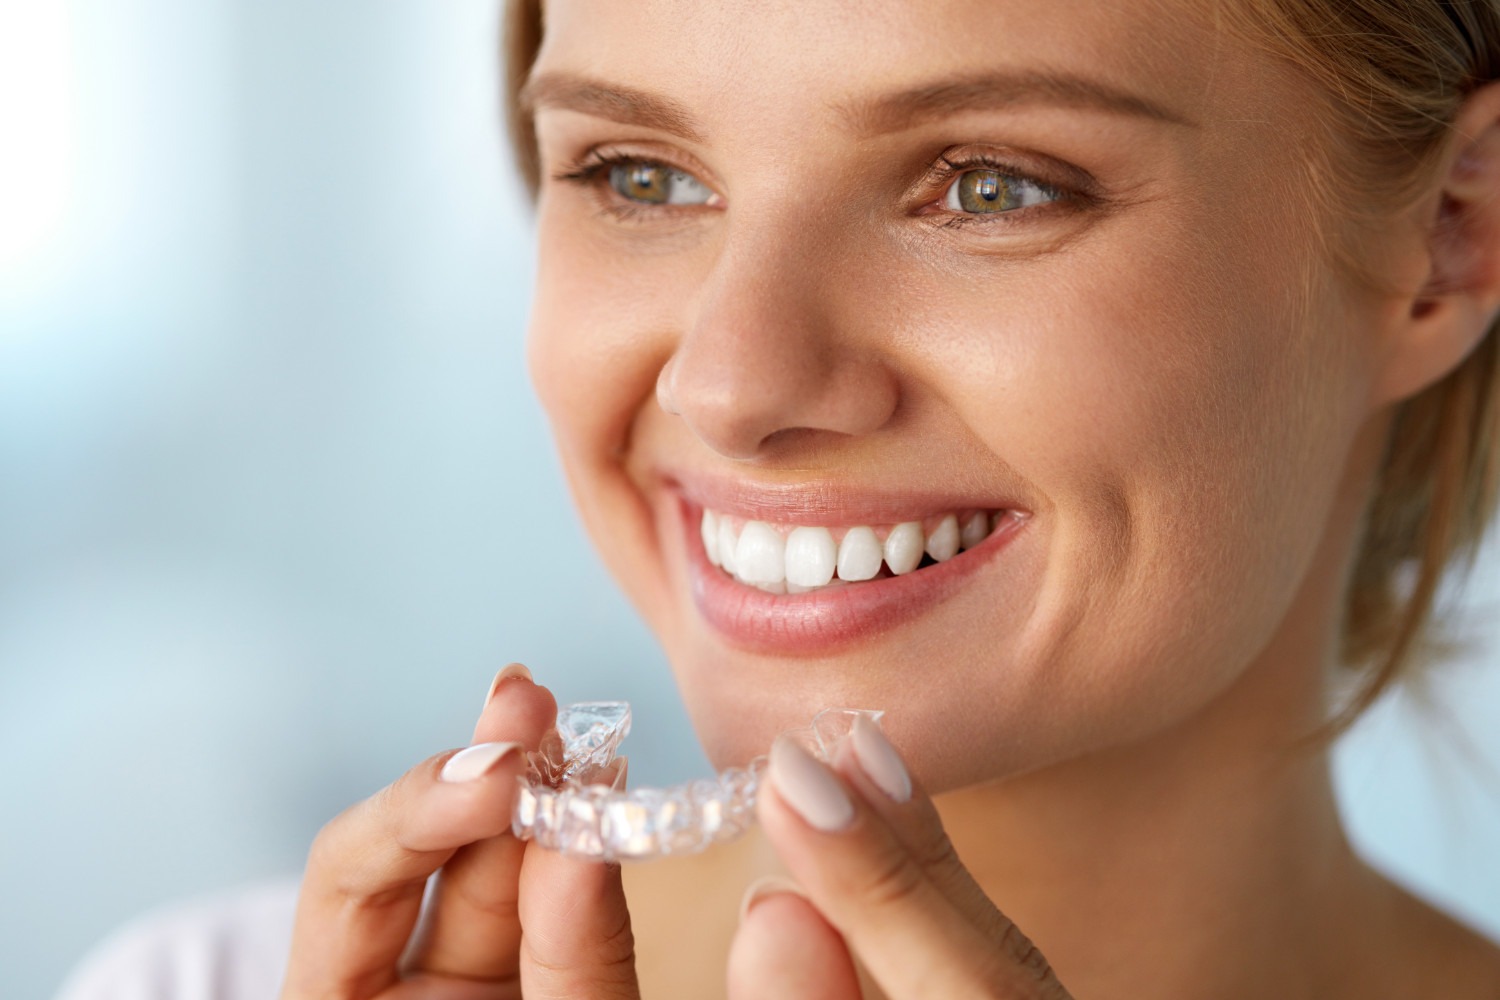 4 Things You're Missing With Mail-Order Orthodontics